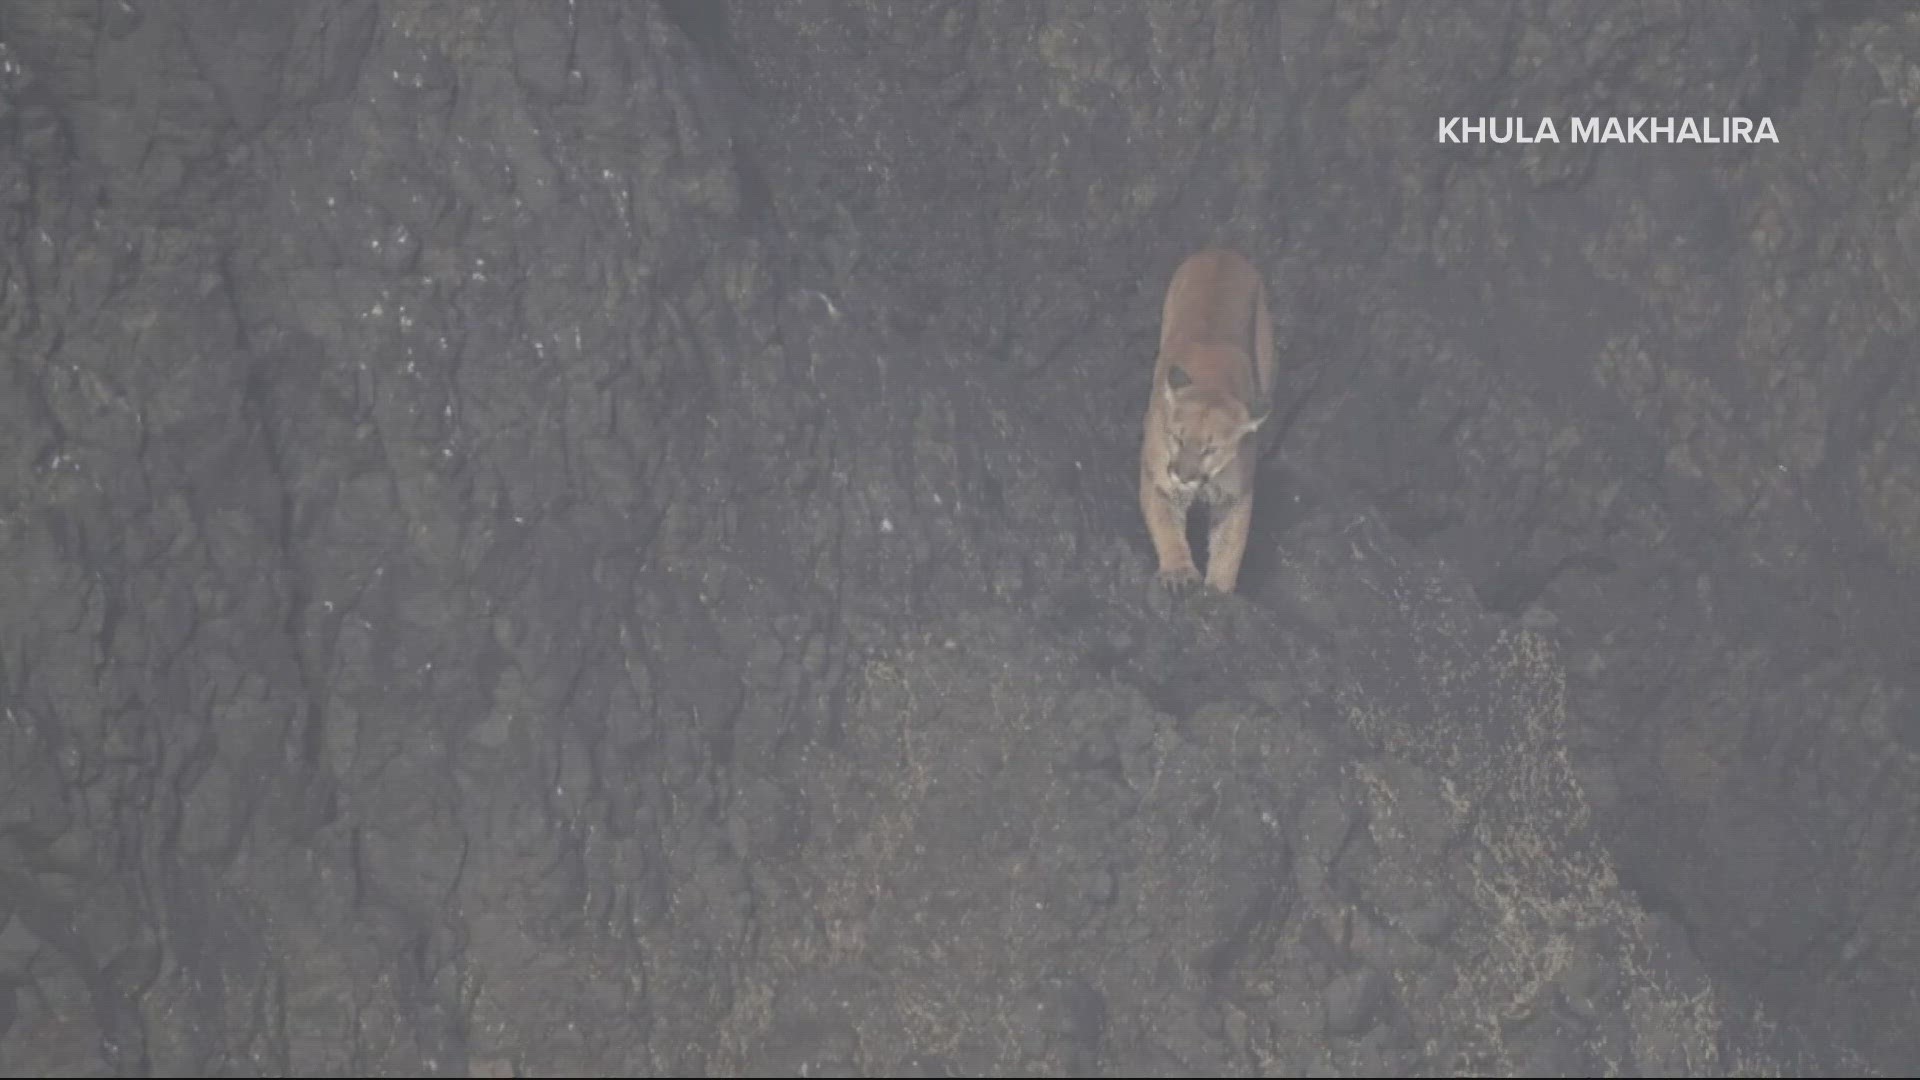 Officials said they saw what appeared to be cougar tracks leading away from Haystack Rock Monday morning, and there was no sign of the cougar on the rock.